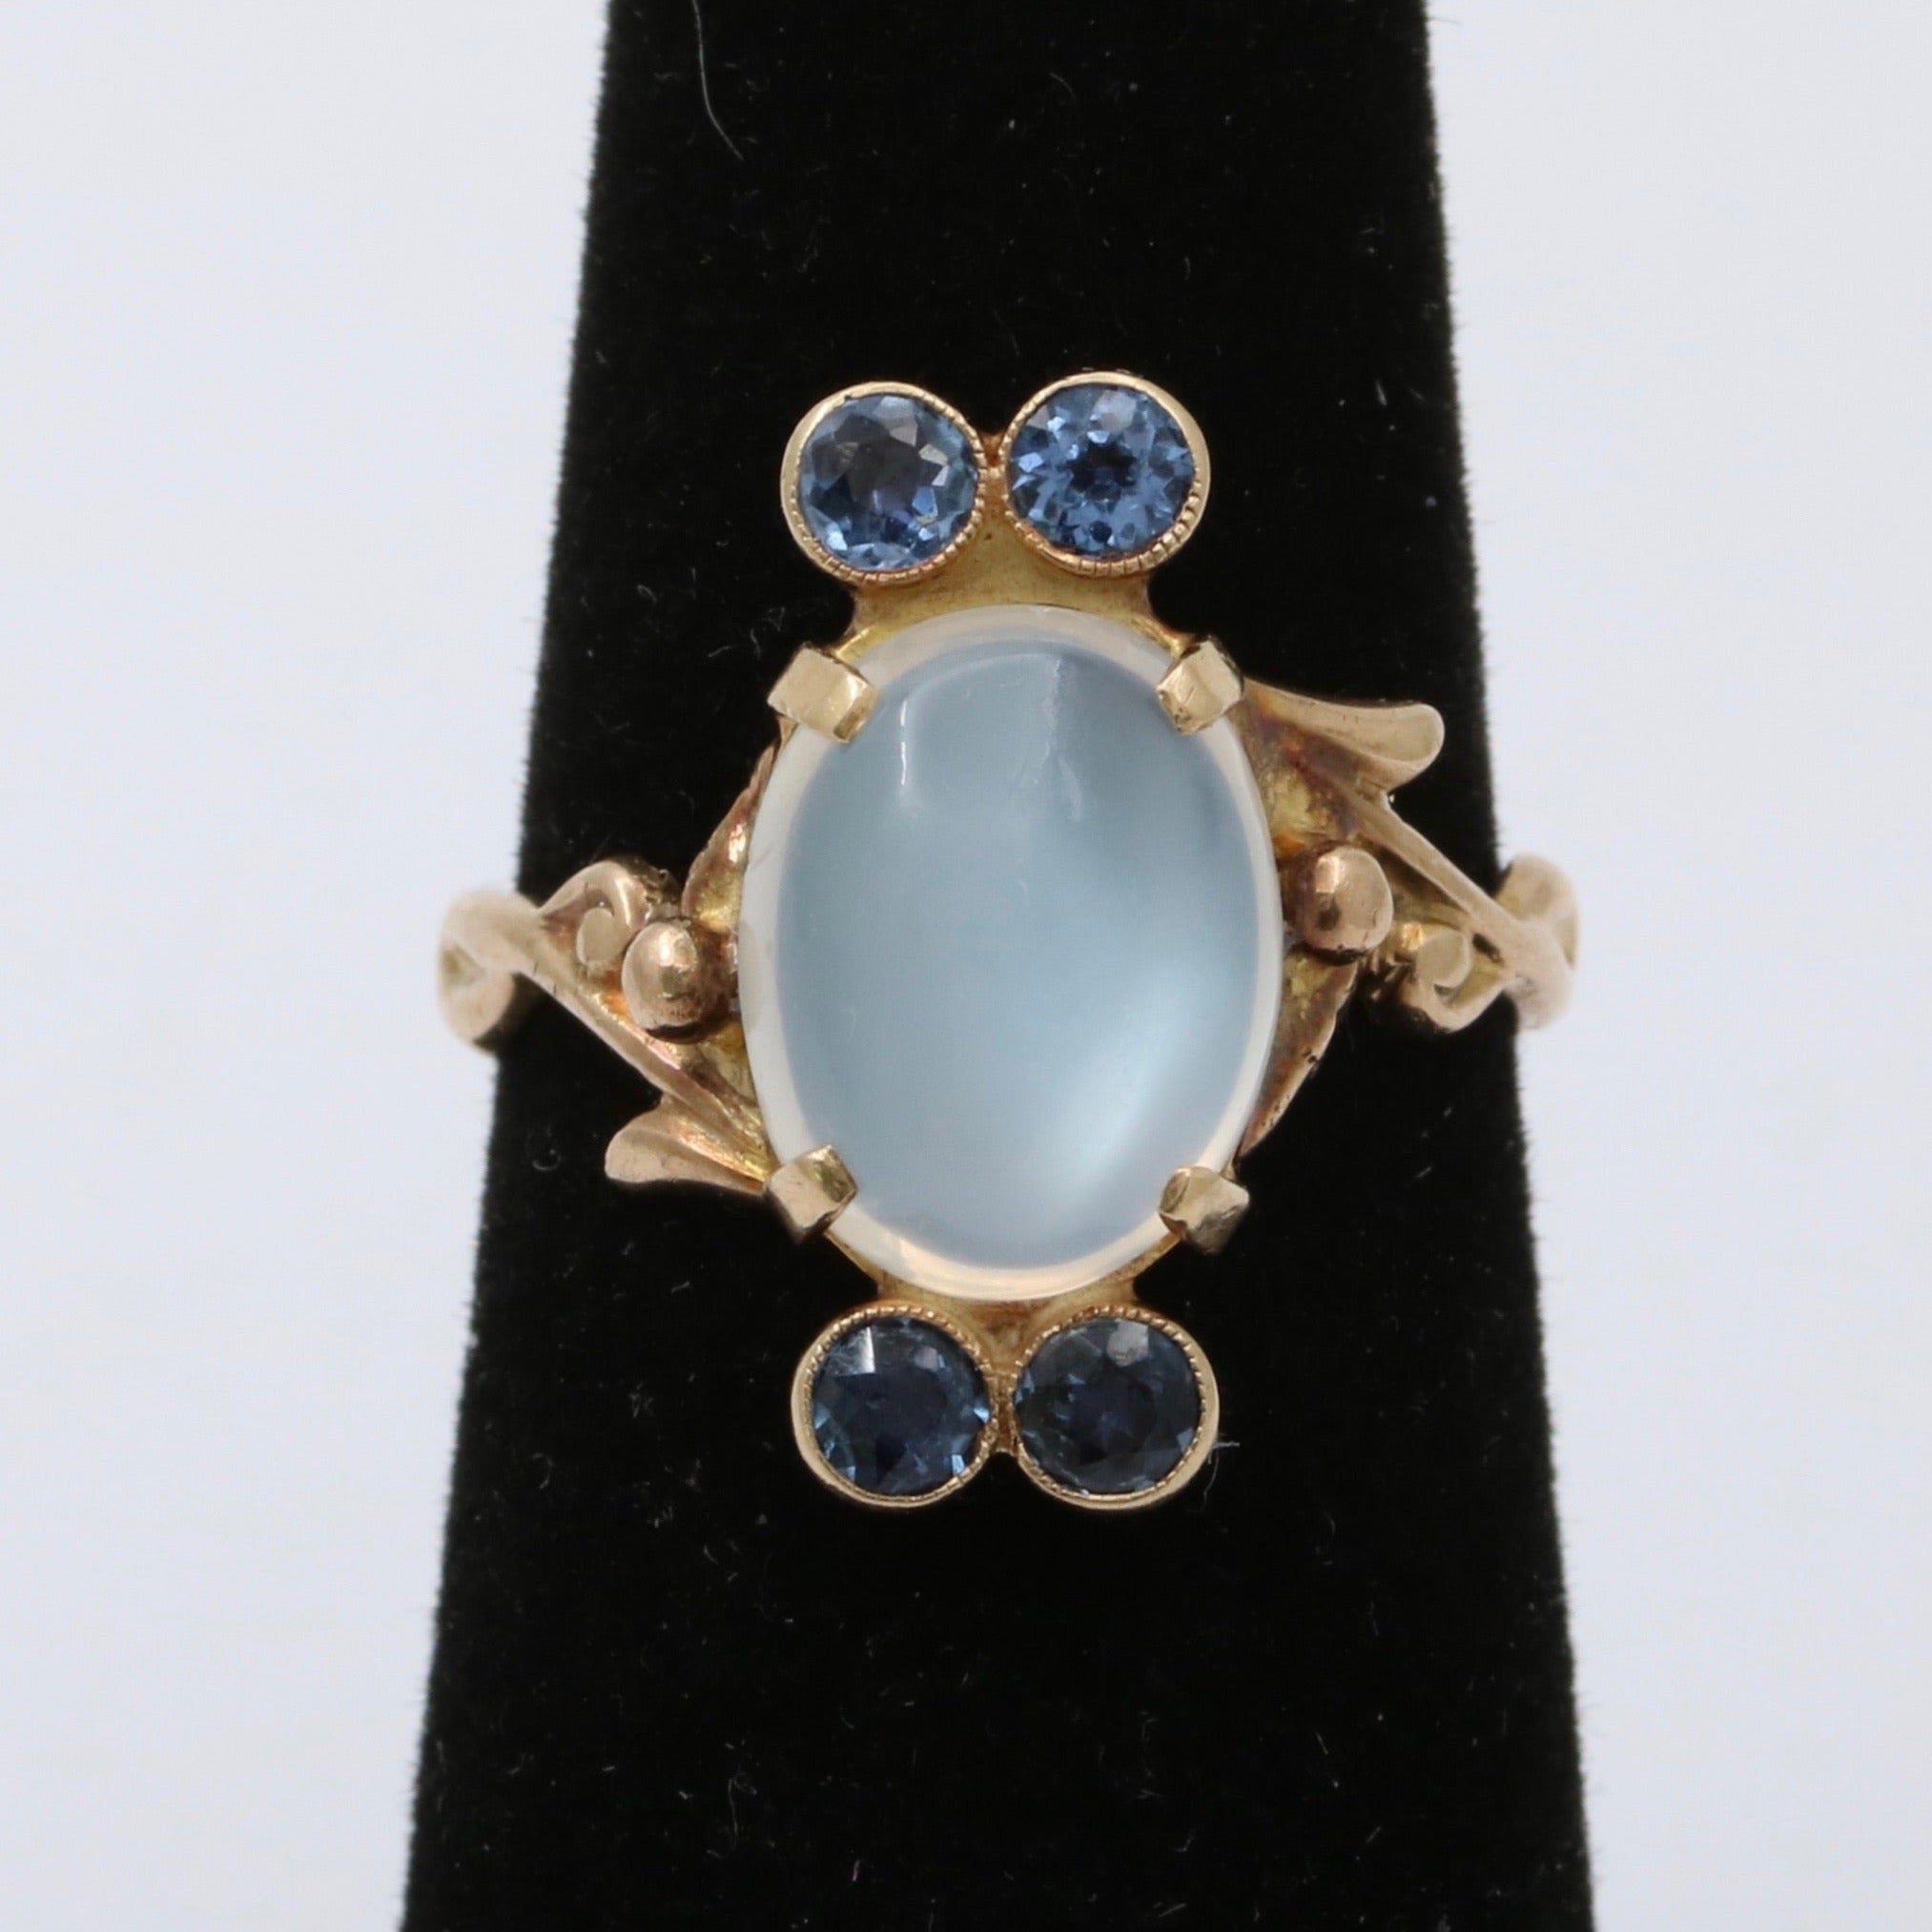 Vintage Moonstone and Sapphire 14K Gold Cluster Ring - Art Deco Jewelry  (1925-1940) - By Era - Jewelry